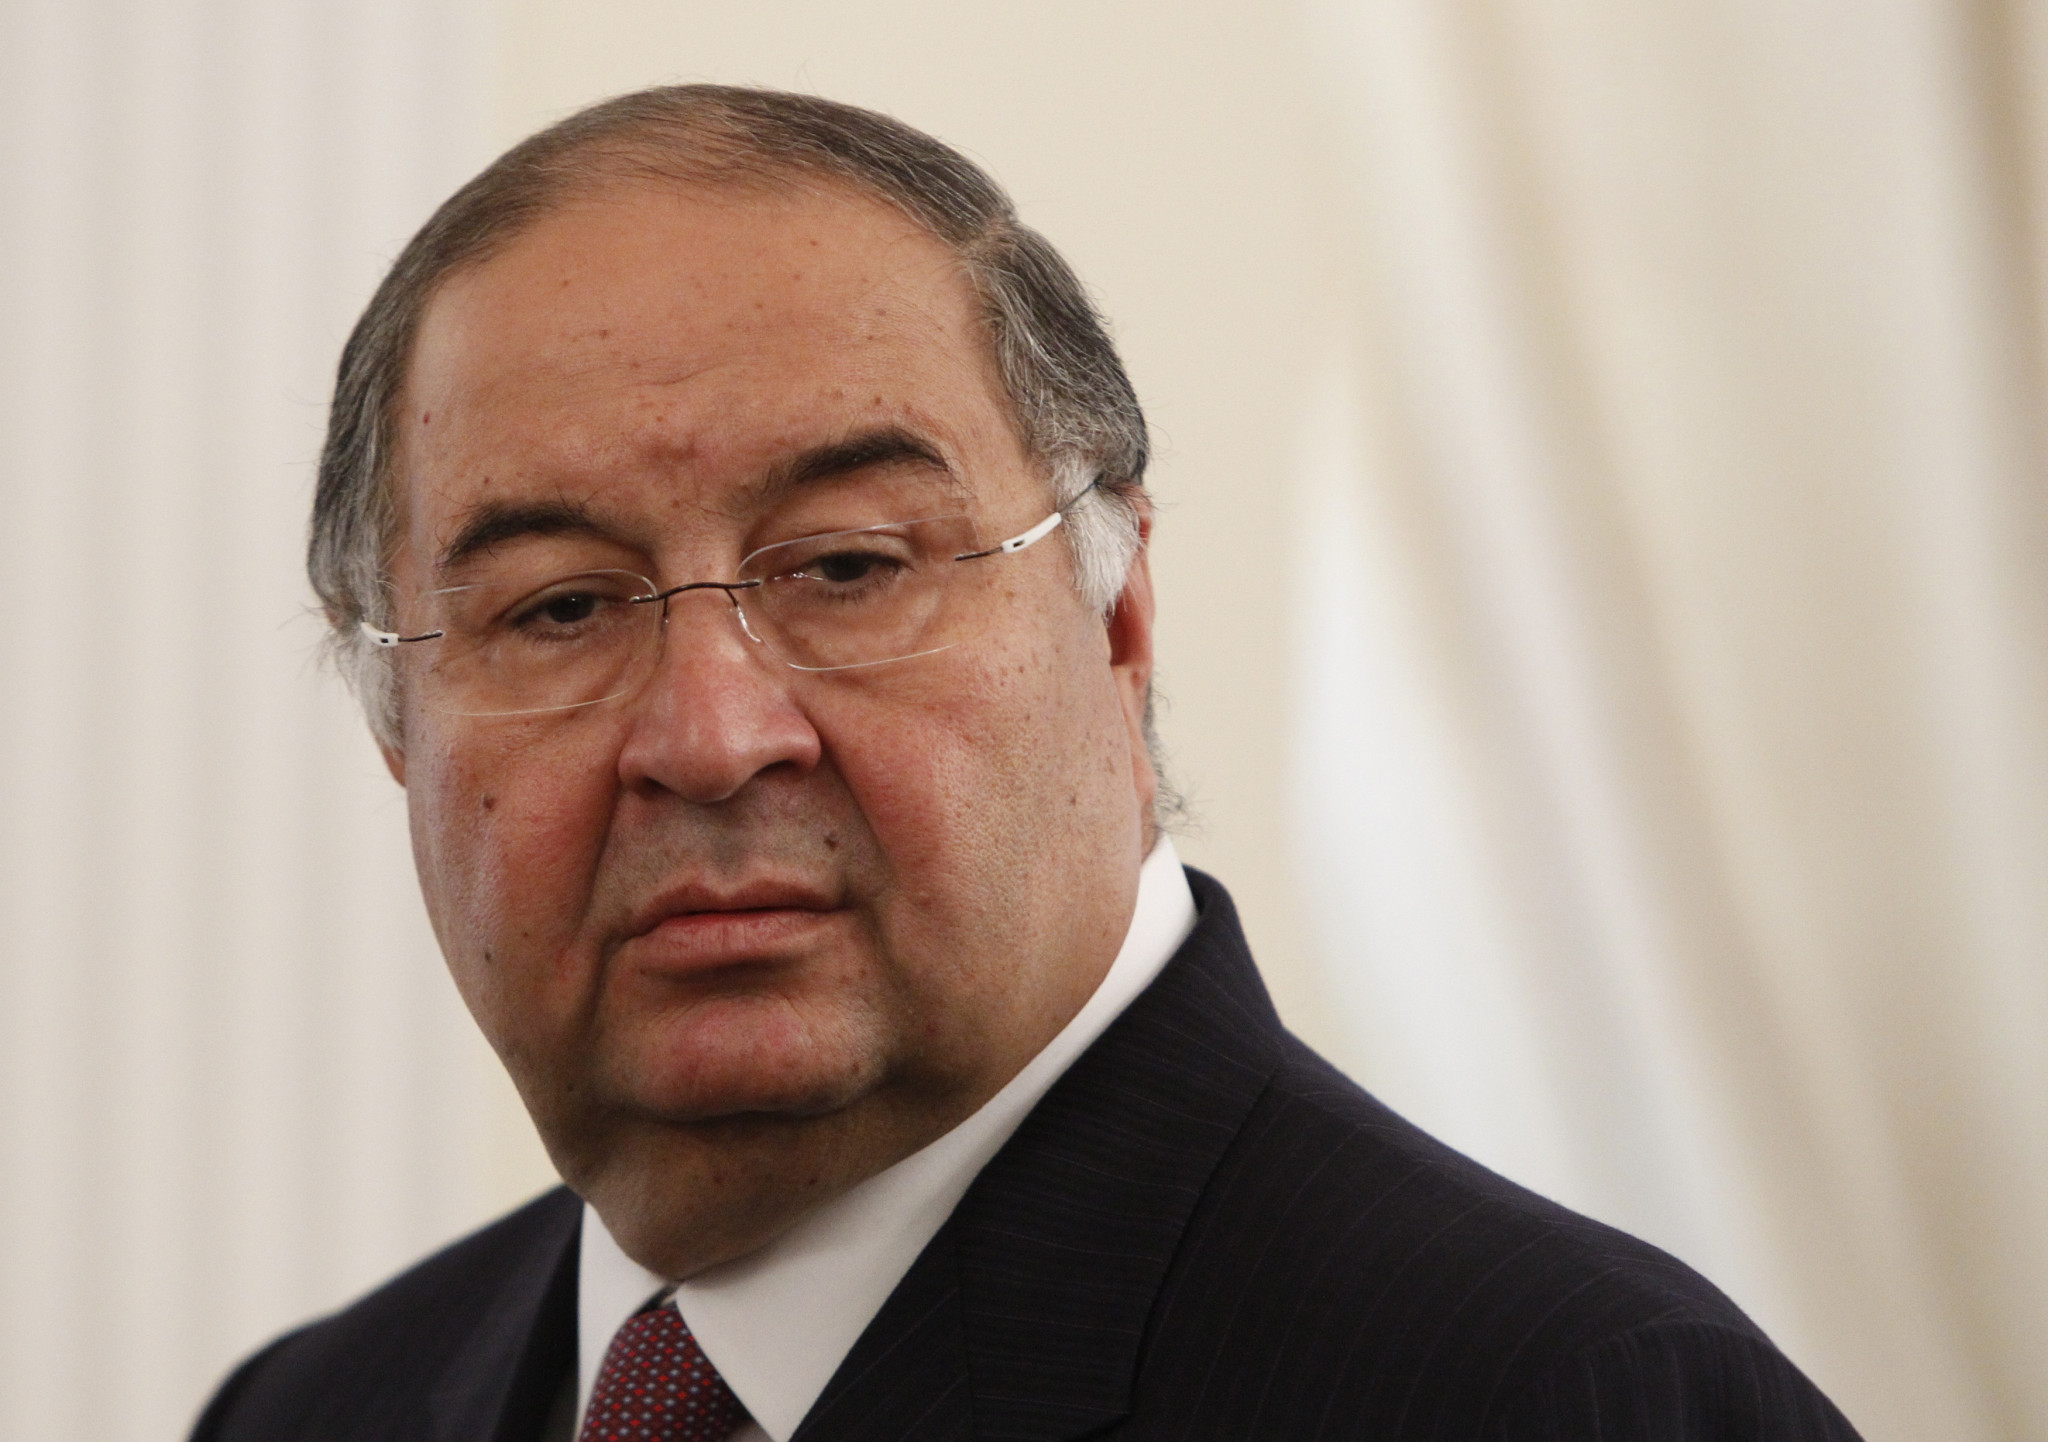 Oligarch Usmanov stands aside as FIE President in wake of EU sanctions